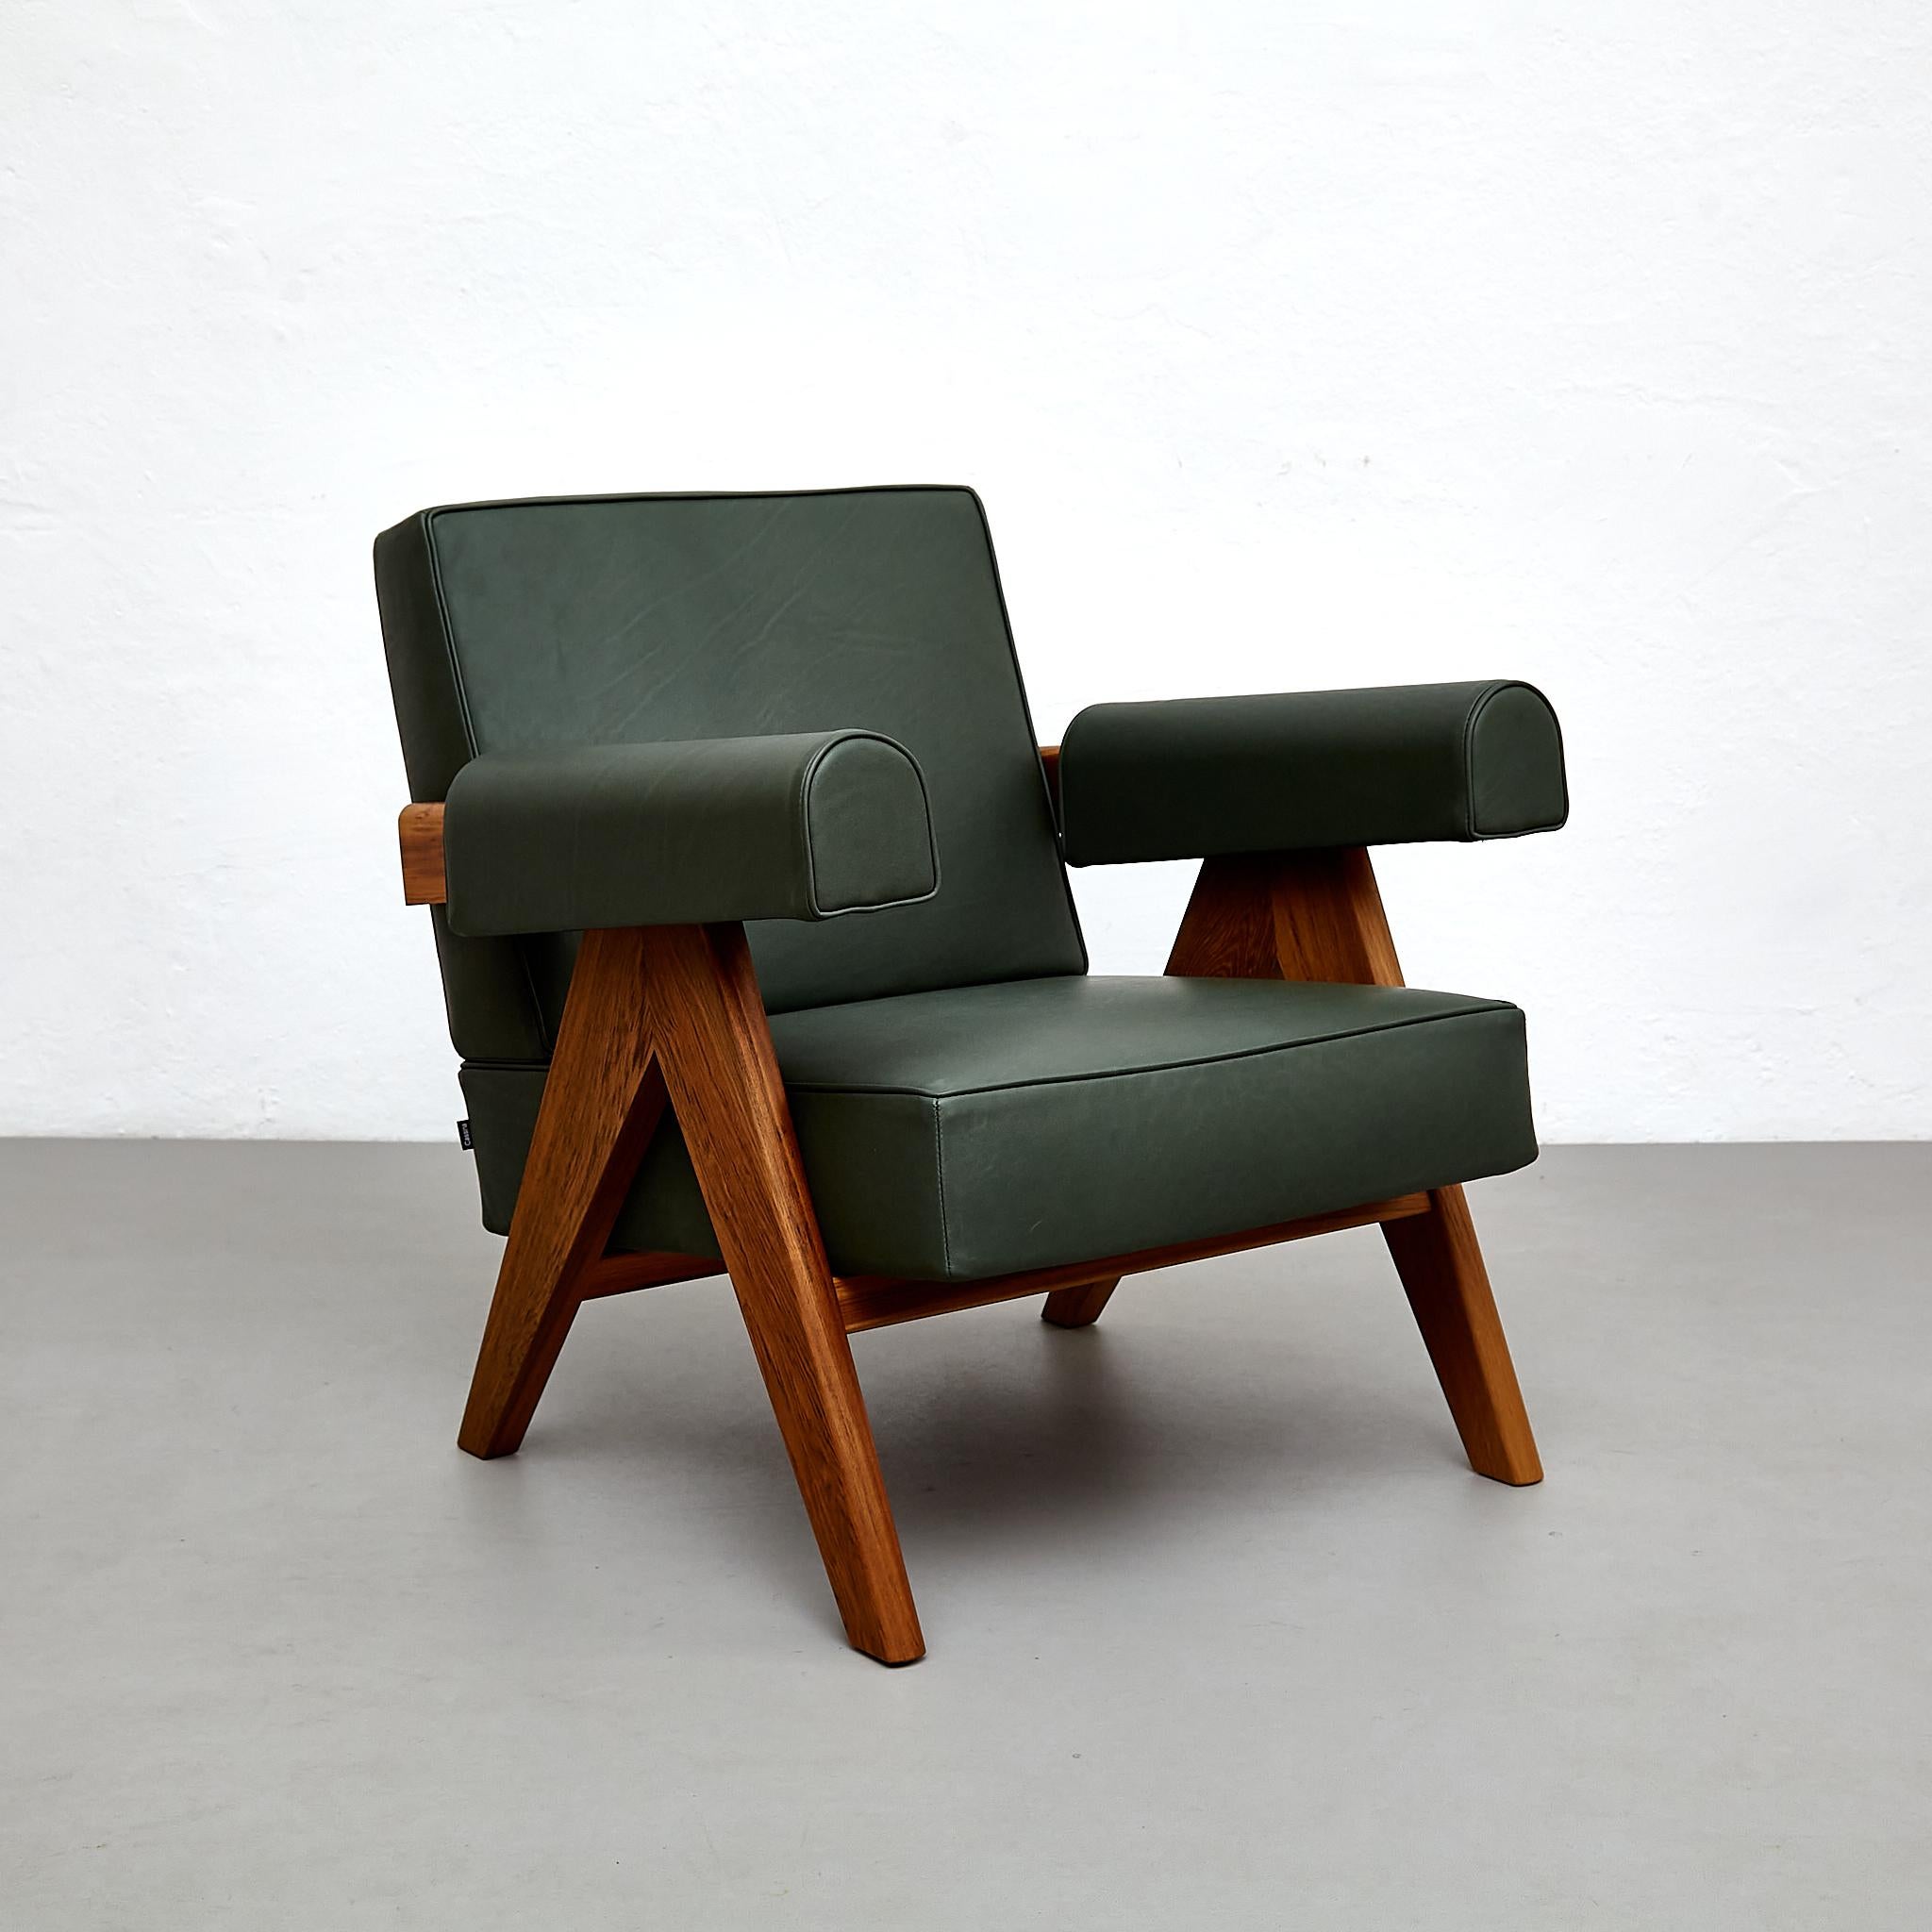 Contemporary Set of Two Pierre Jeanneret Teak Wood Green Leather Armchair by Cassina For Sale